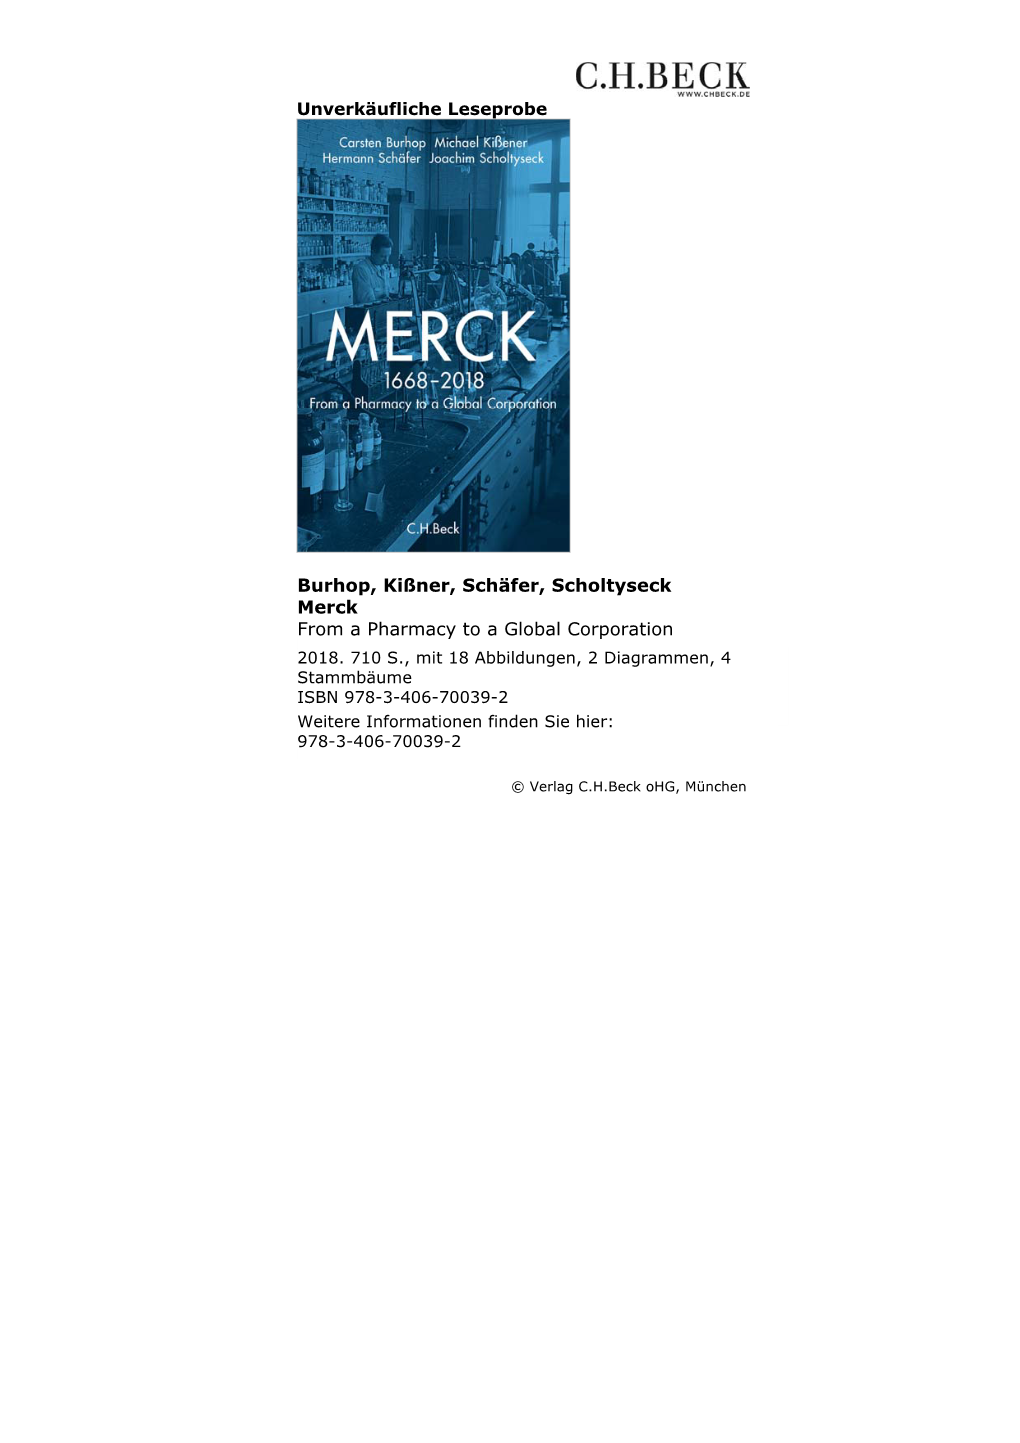 Merck from a Pharmacy to a Global Corporation 2018